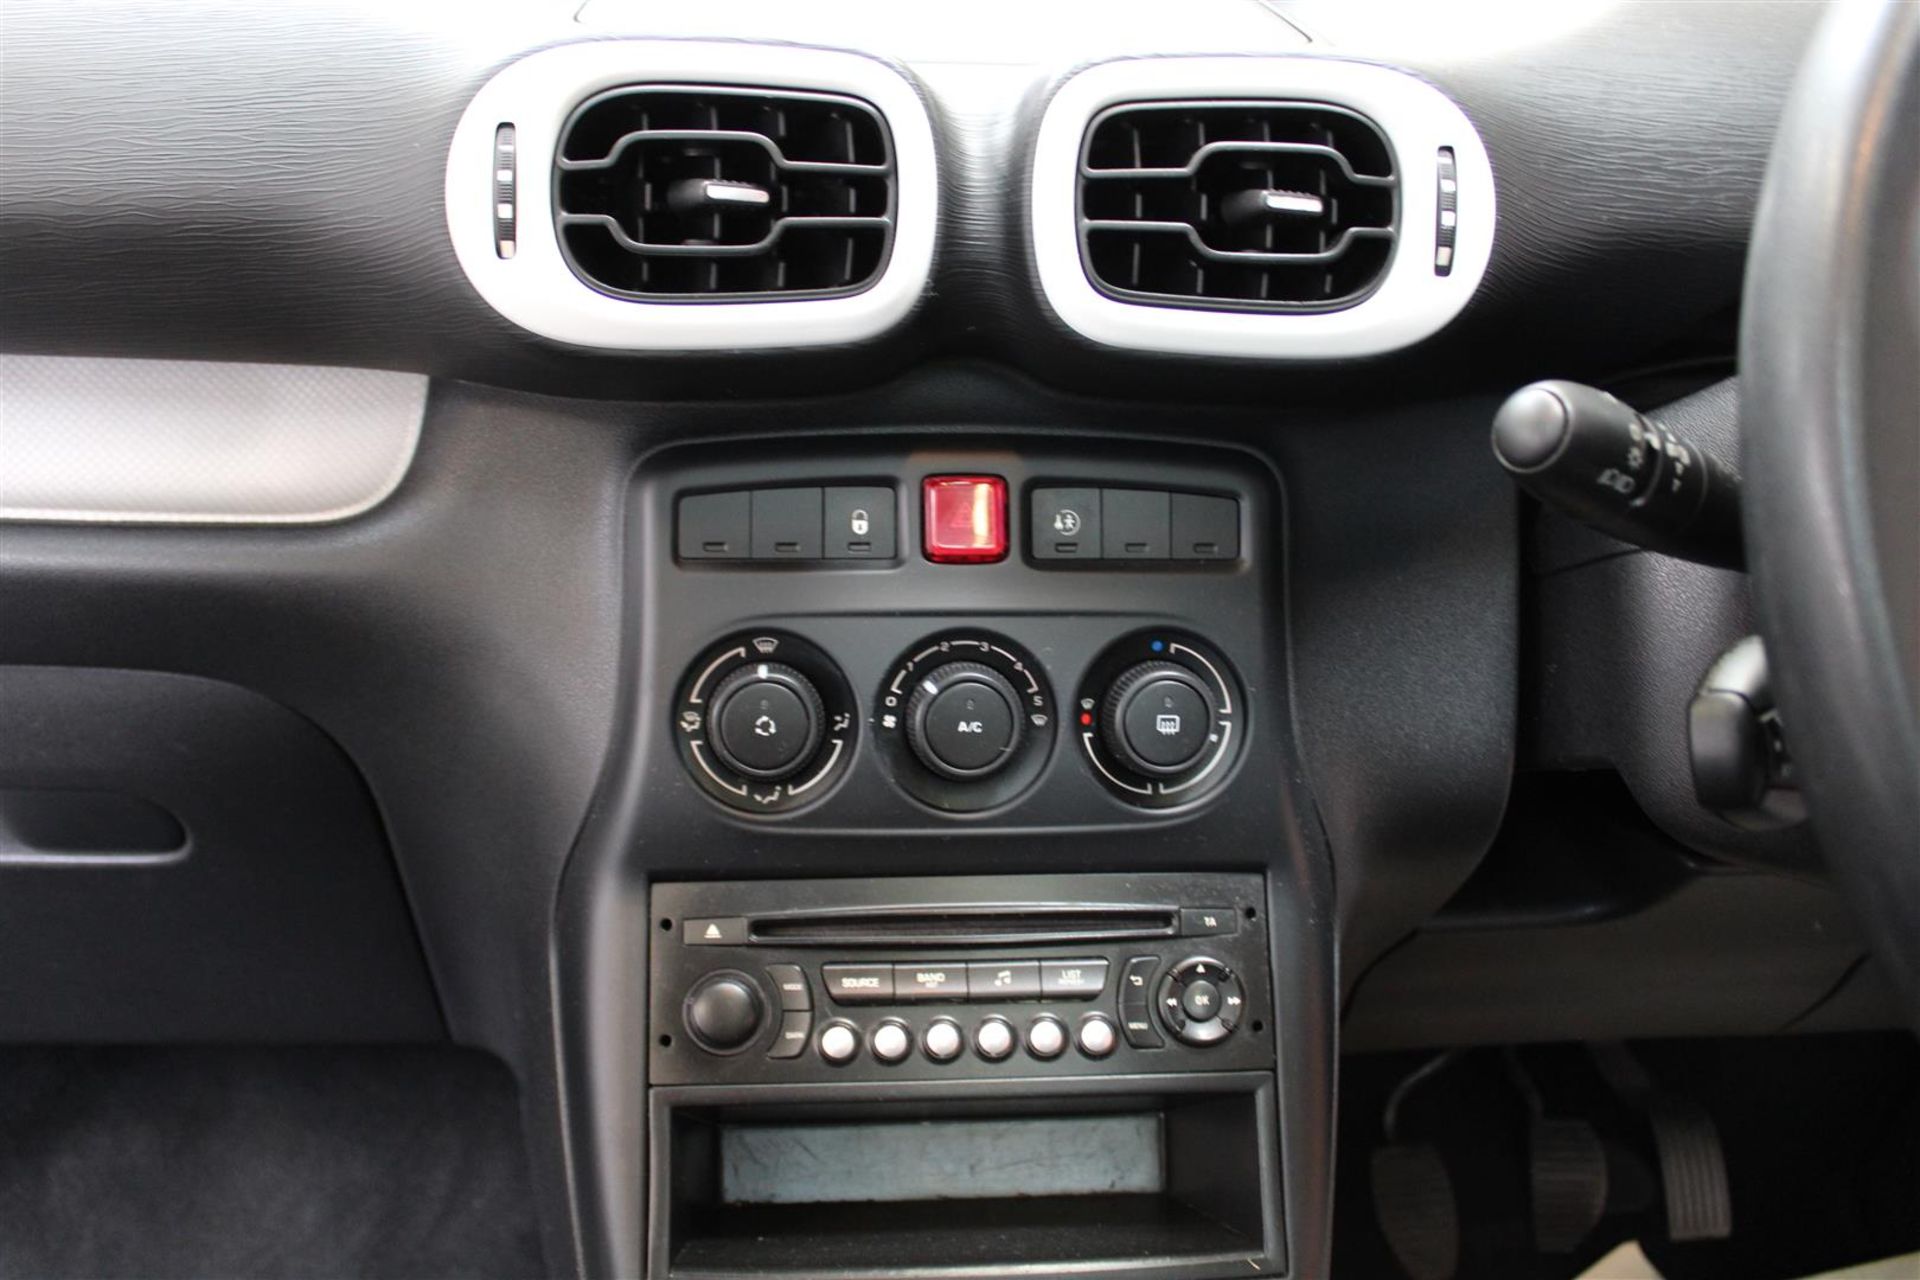 13 13 Citroen C3 Picasso Selection - Image 8 of 37